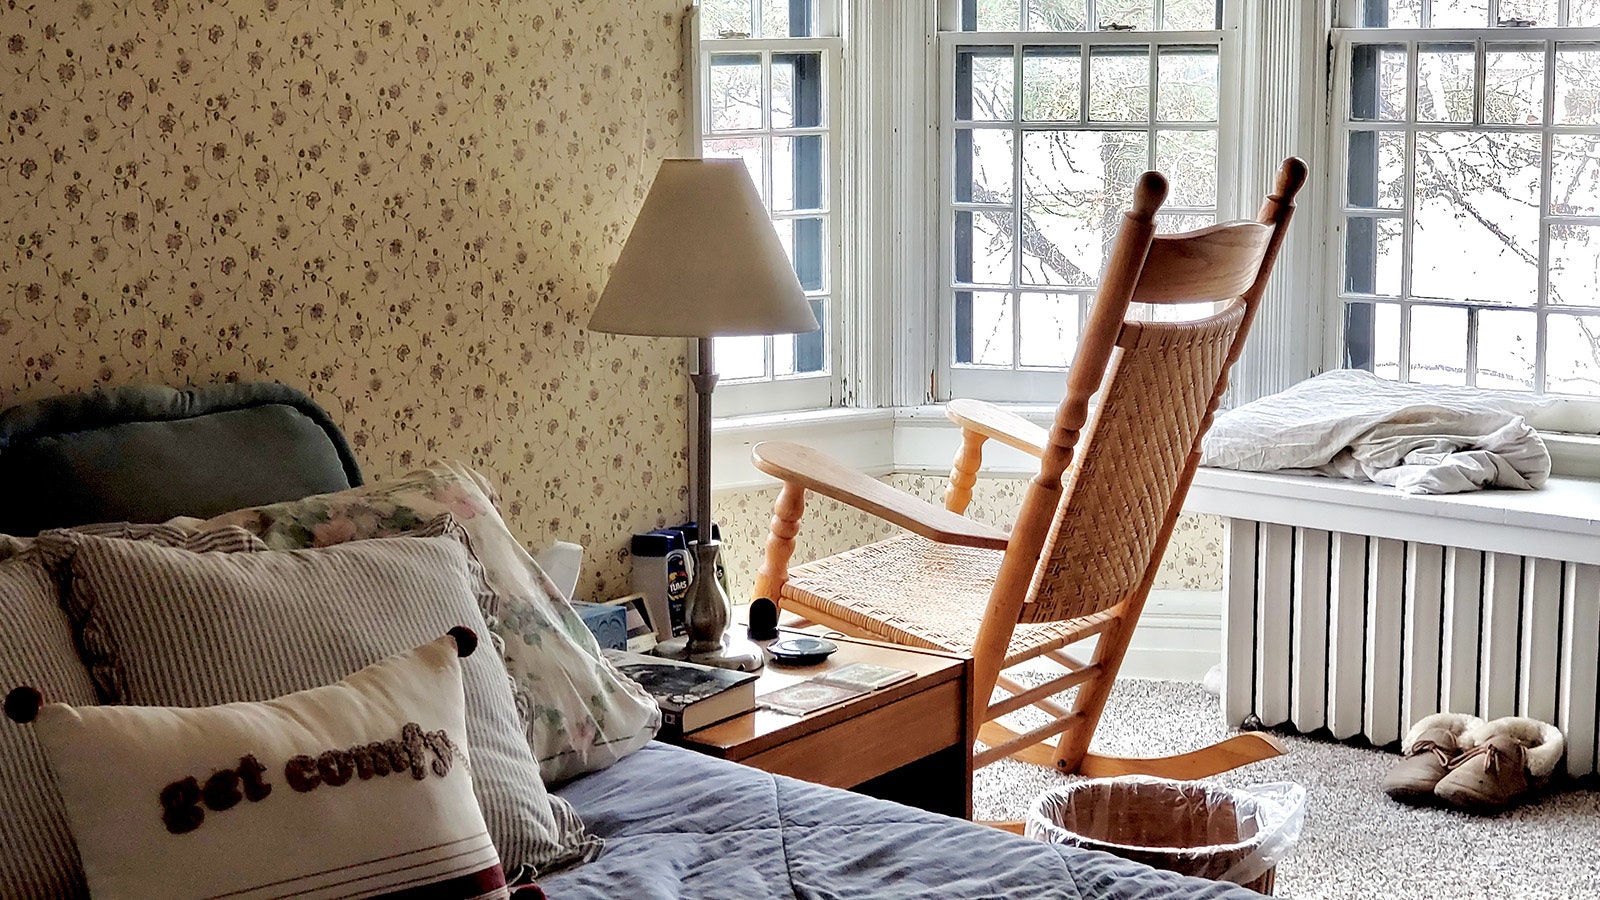 The master suite in the Sturgis House has a turret to the right of the bed that overlooks the yard outside while the radiator features a wooden bench for sitting.